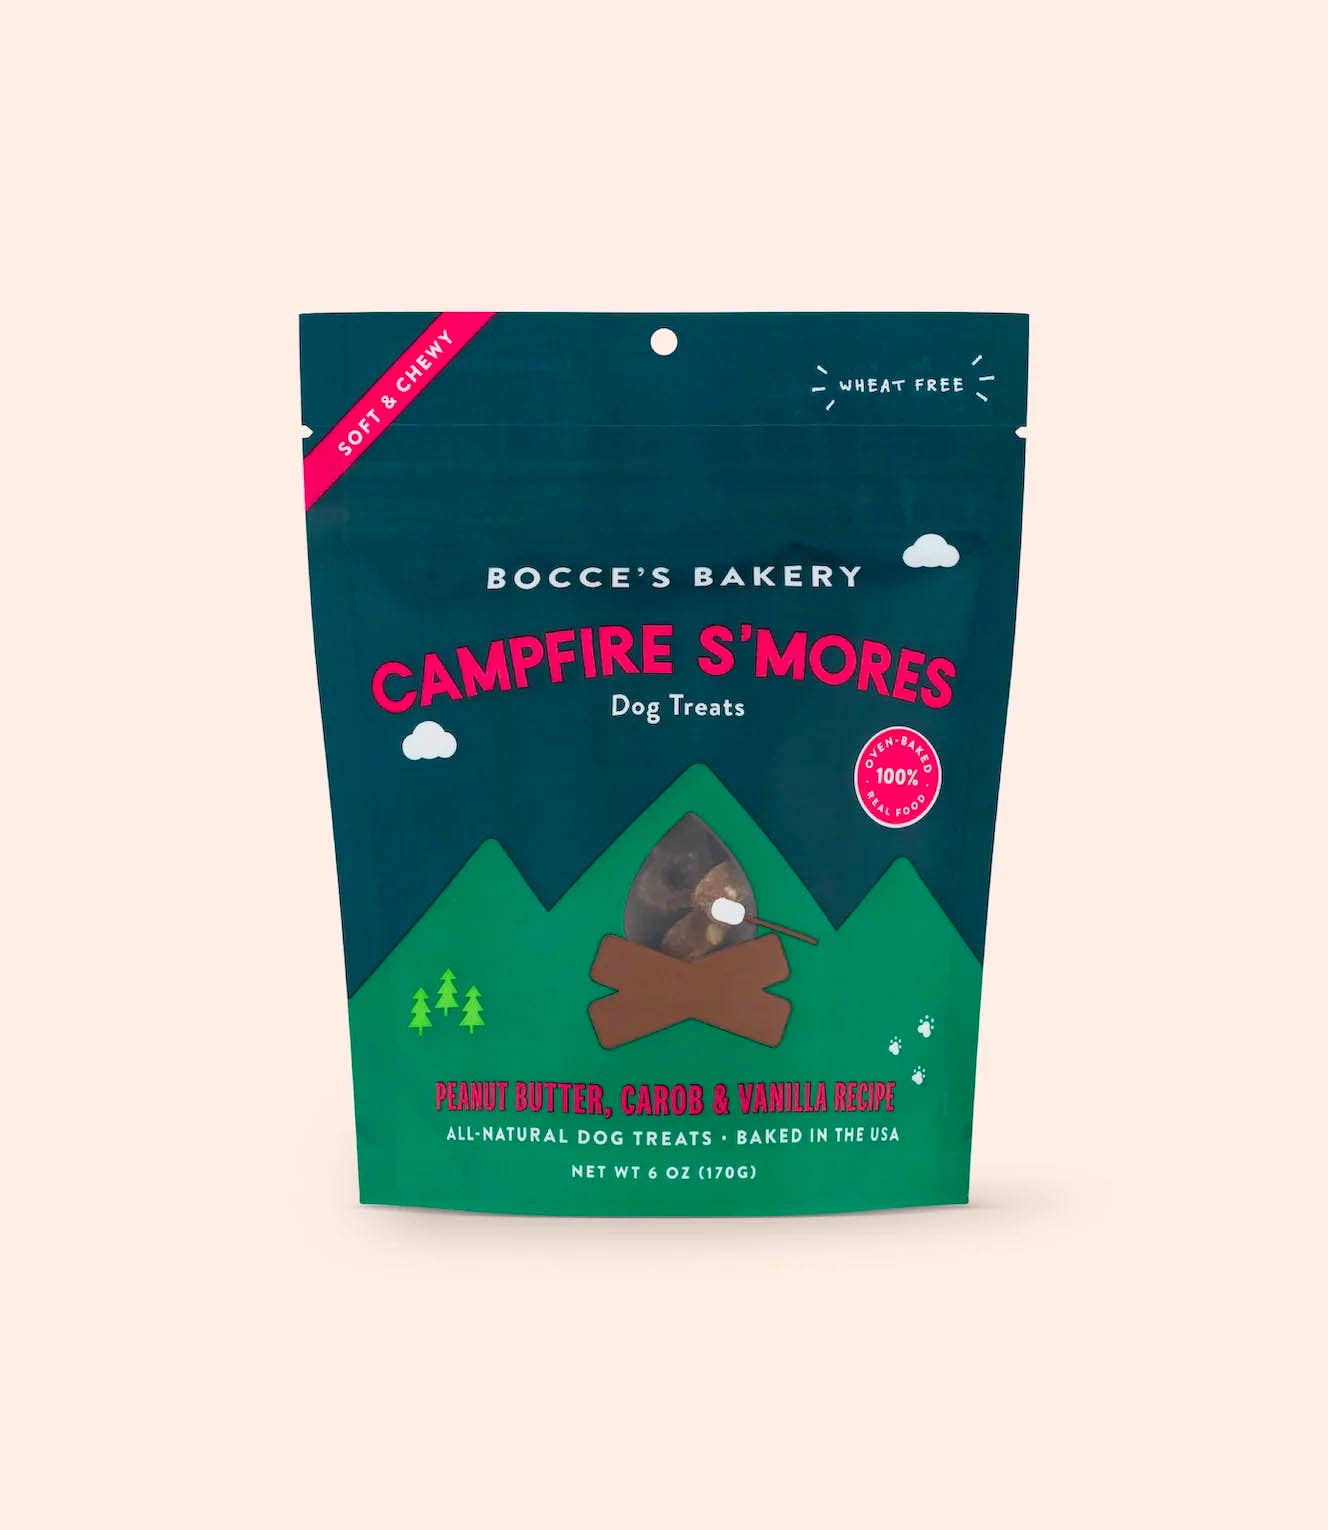 Bocce's Bakery Campfire S'mores 6oz Soft & Chewy Dog Treats